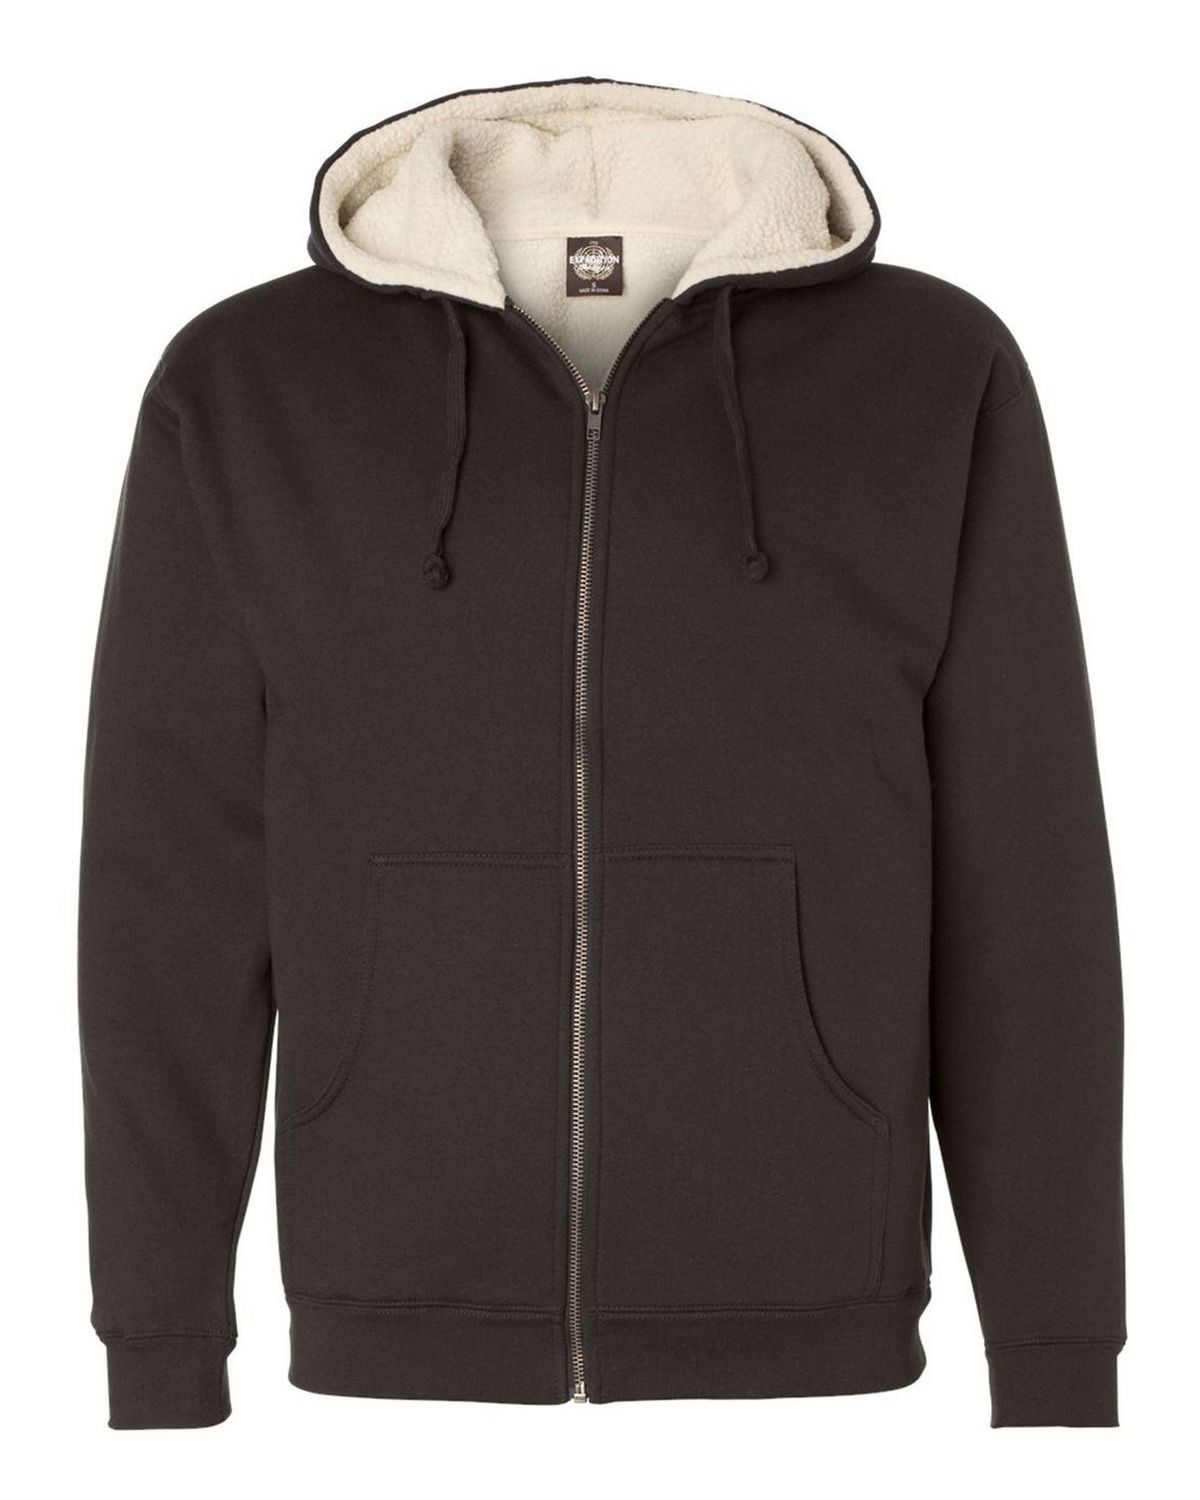 Independent Trading Co. EXP40SHZ Mens Sherpa Lined Full-Zip Hooded ...